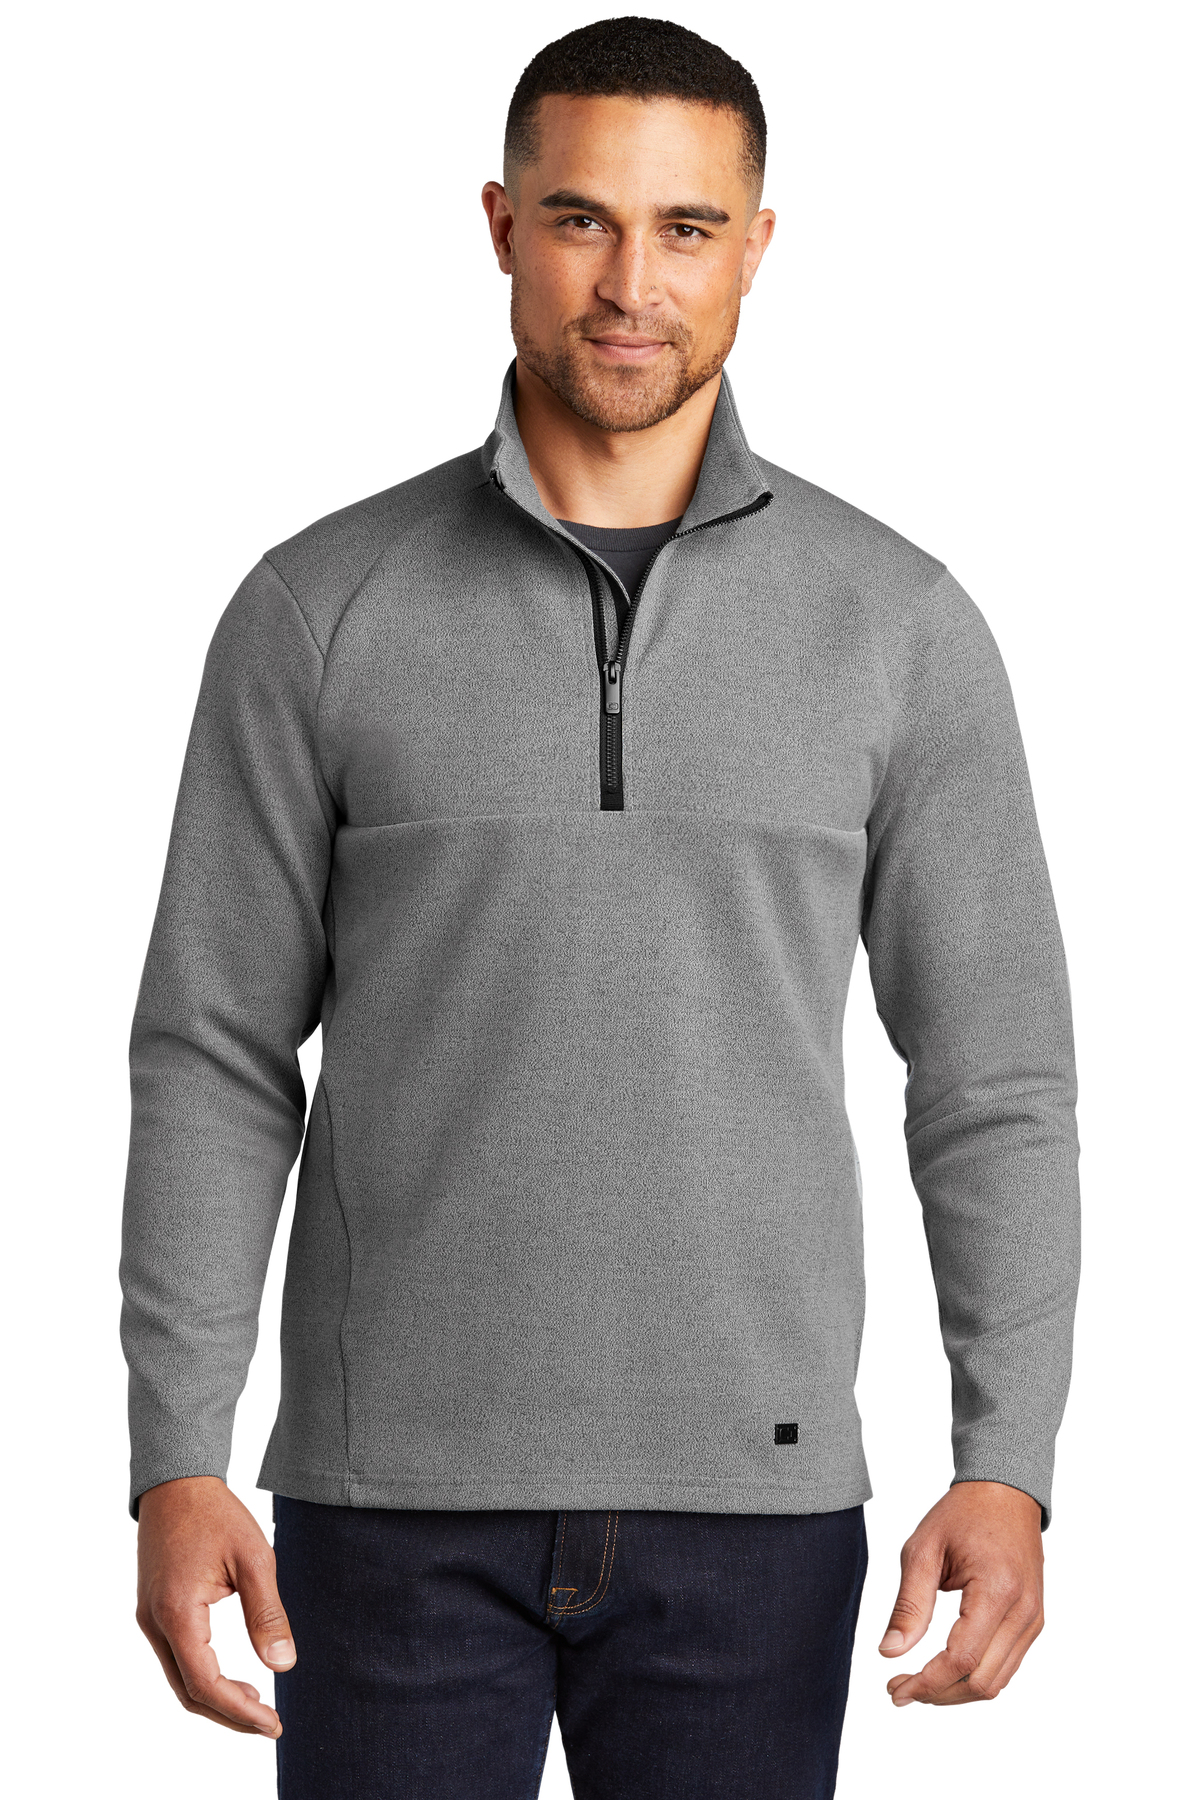 OGIO Embroidered Men's Transition 1/4-Zip | Outerwear - Queensboro